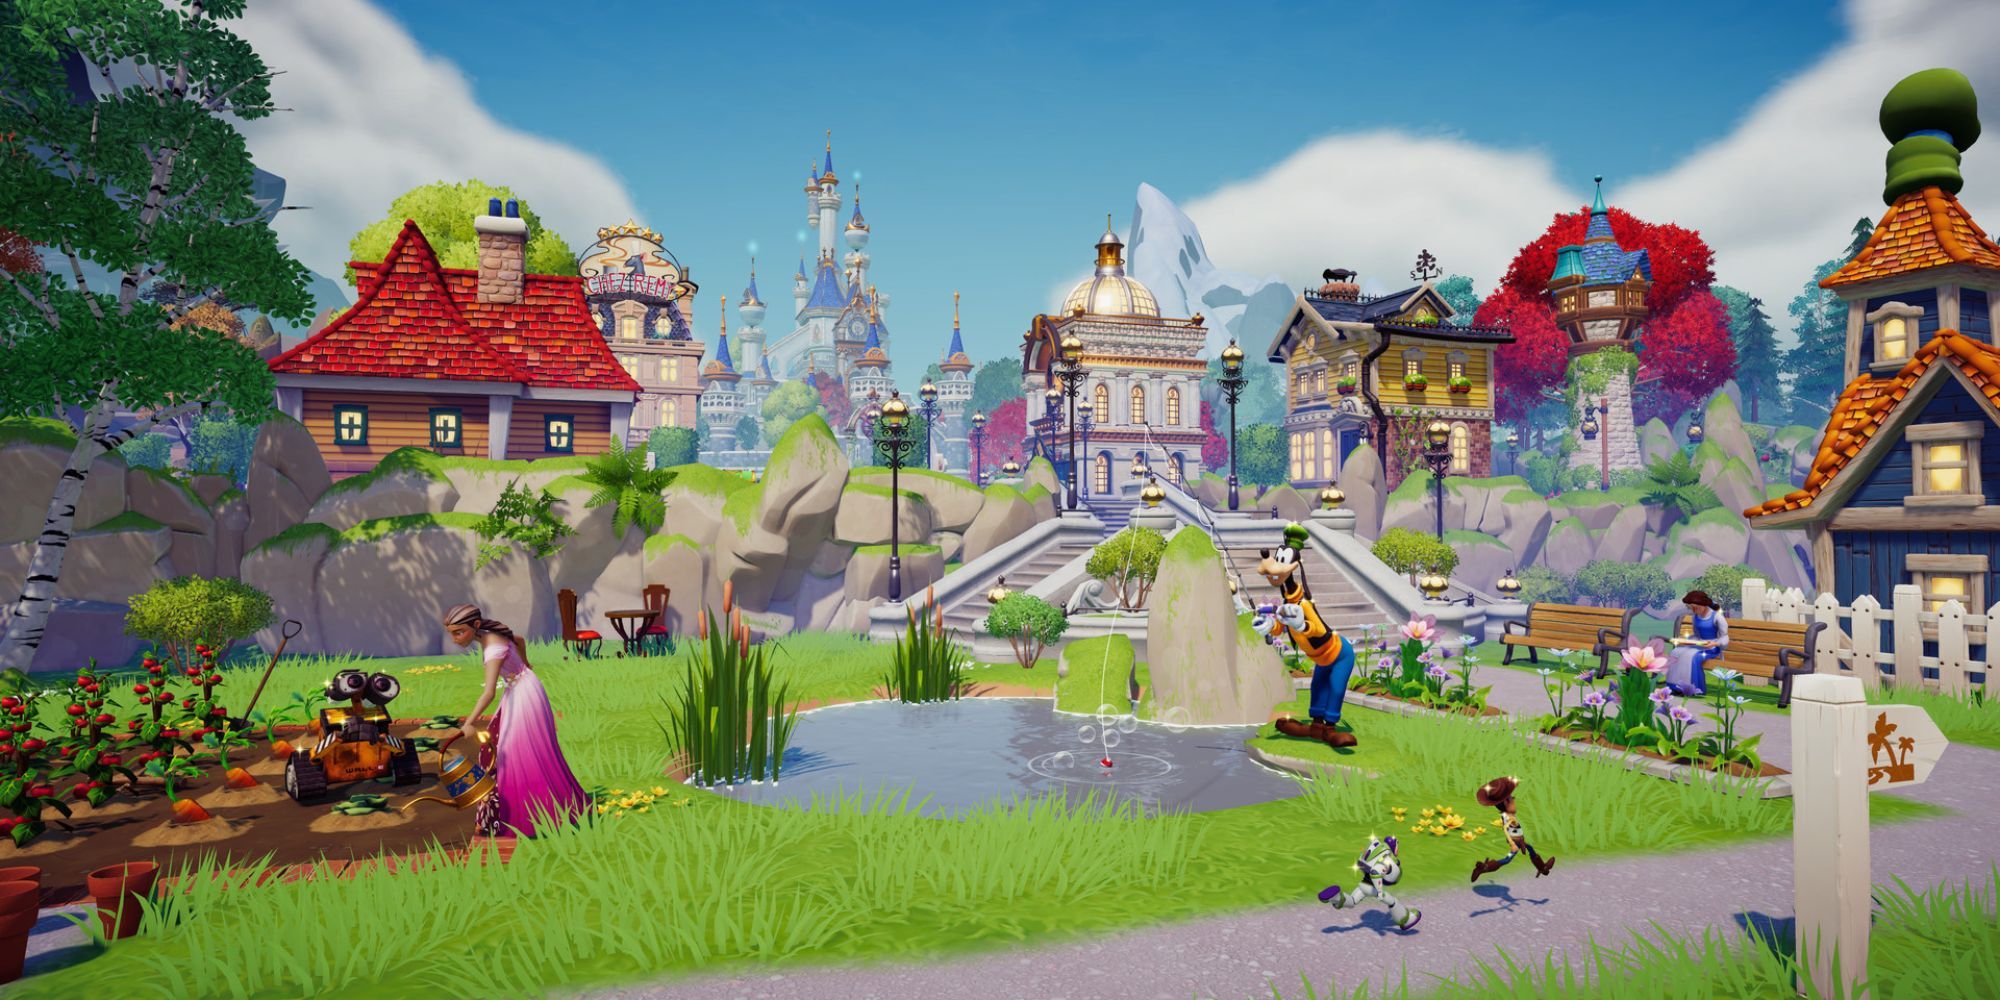 The player watering crops while Goofy fishes and Bella reads in Disney Dreamlight Valley